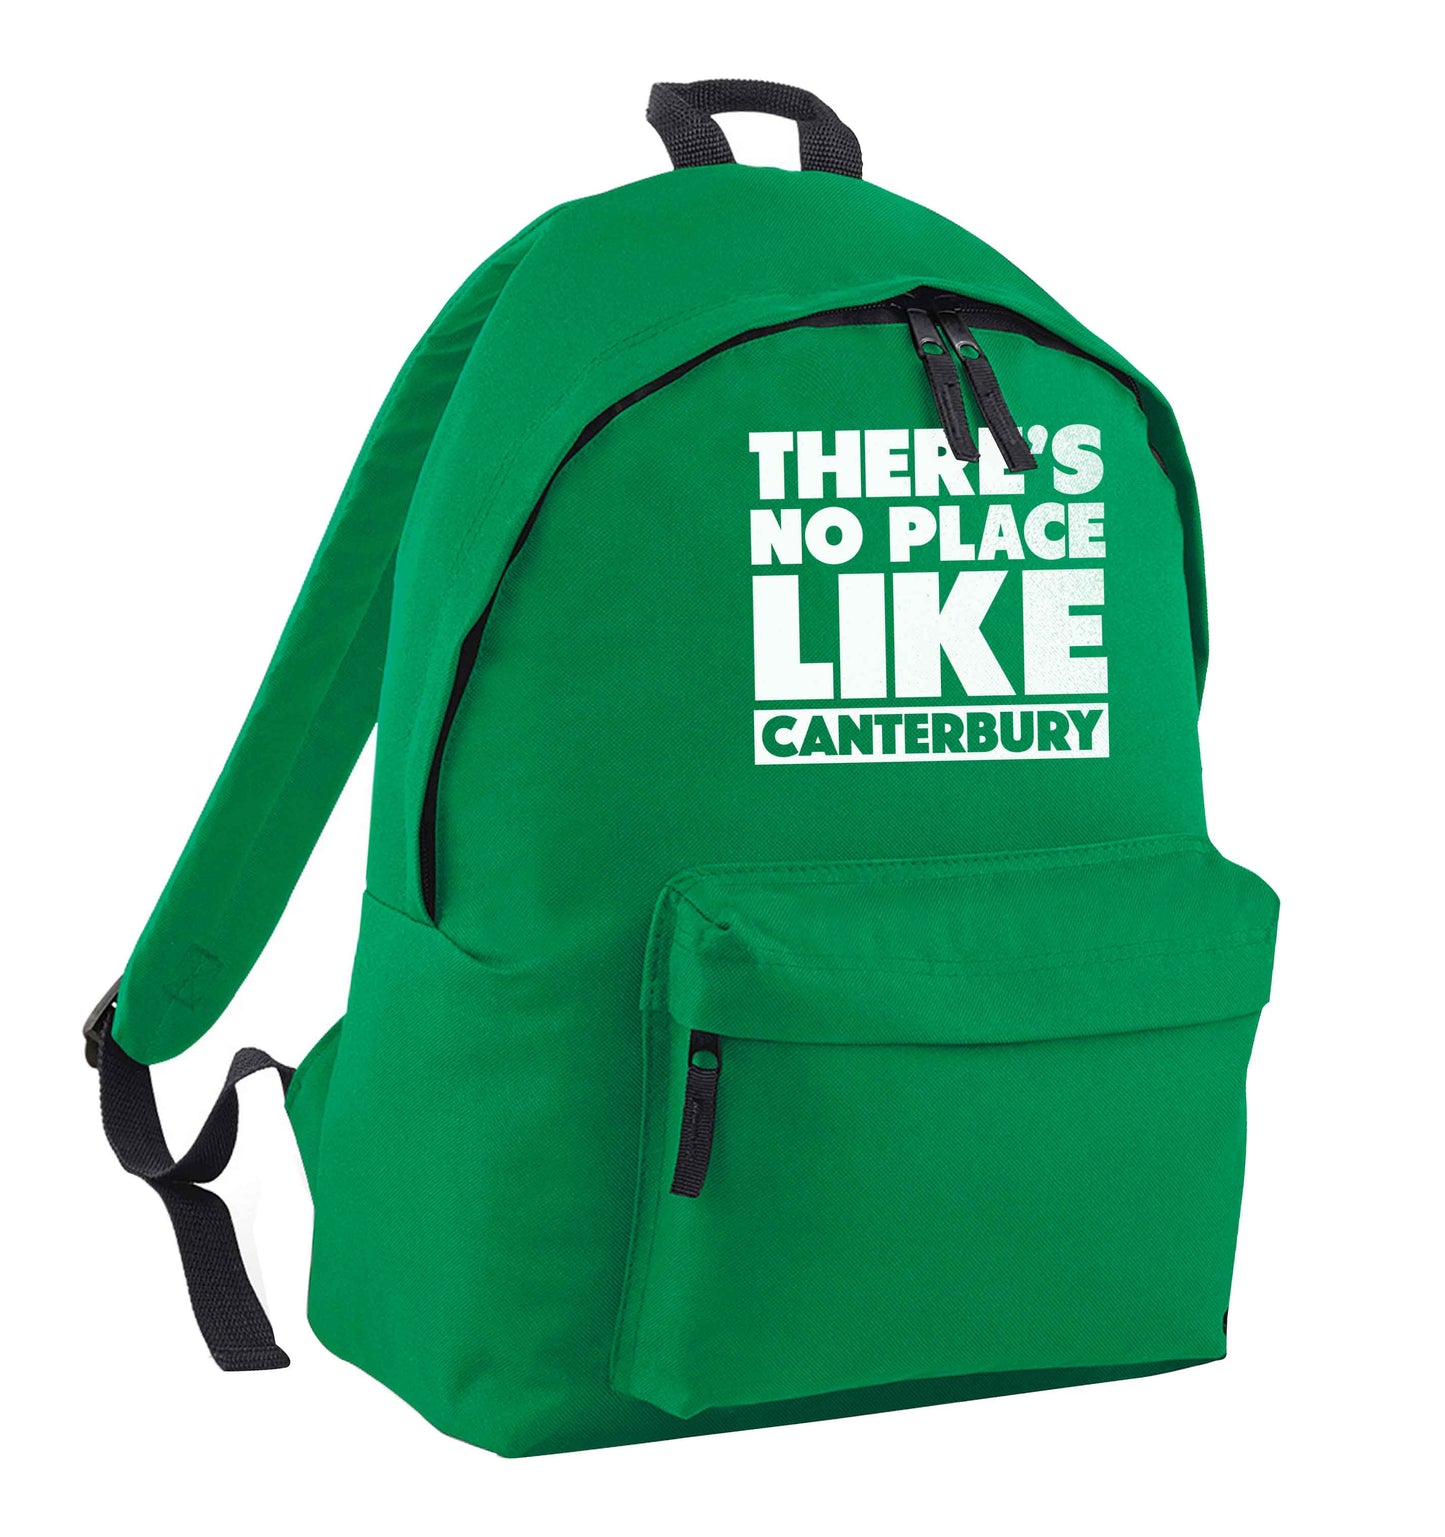 There's no place like Canterbury green adults backpack